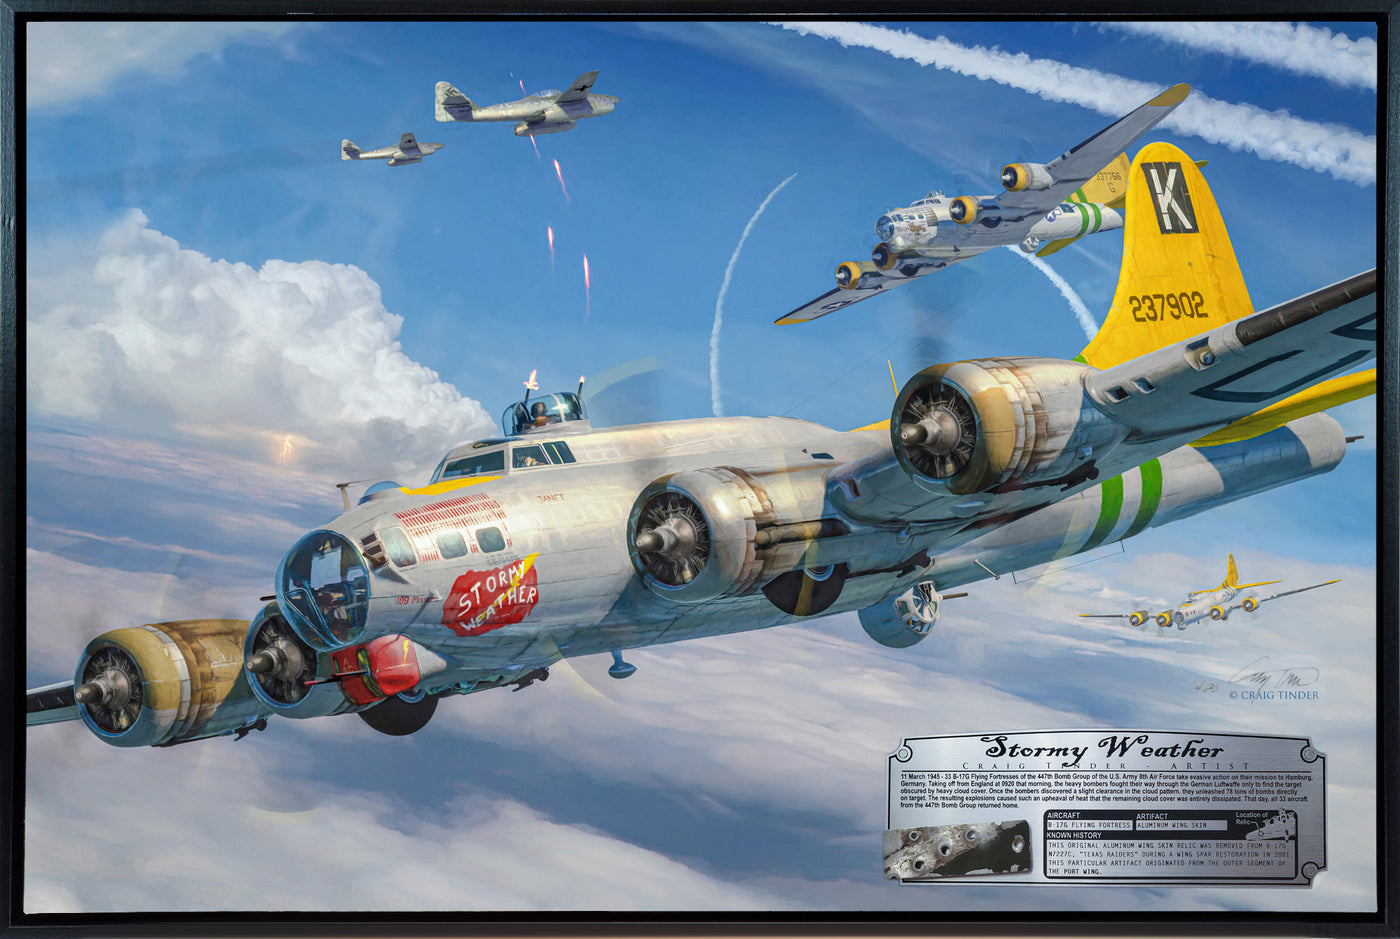 Stormy Weather - B-17G Flying Fortress Aviation Art-Art Print-Aces In Action: The Workshop of Artist Craig Tinder